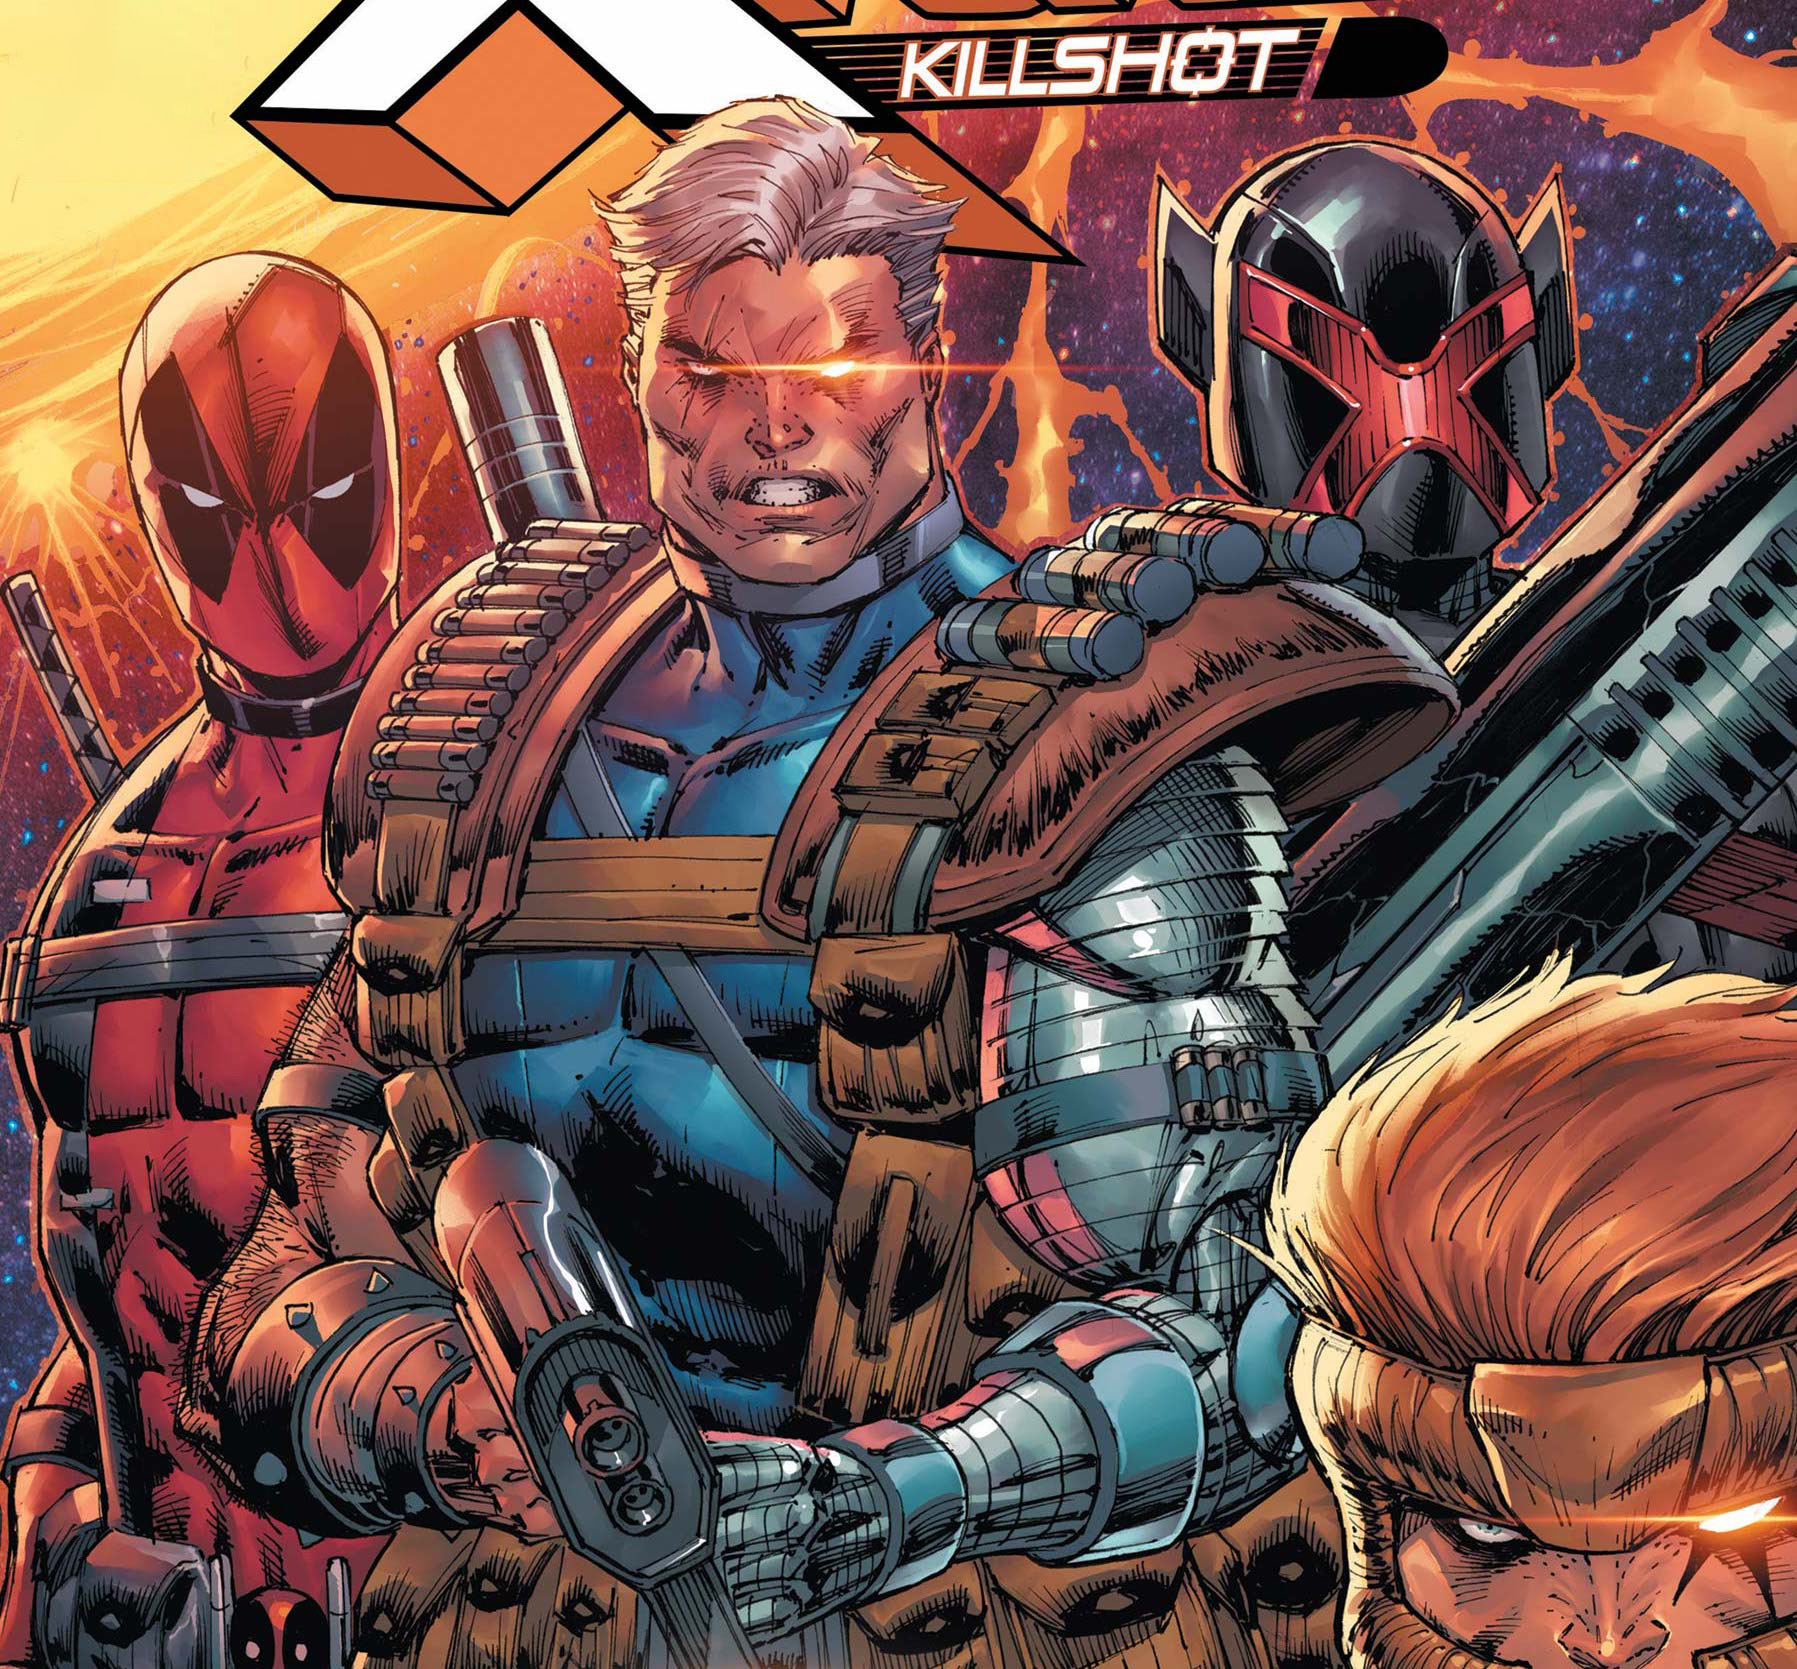 'X-Force: Killshot Anniversary Special' #1 is a hot mess straight from the '90s